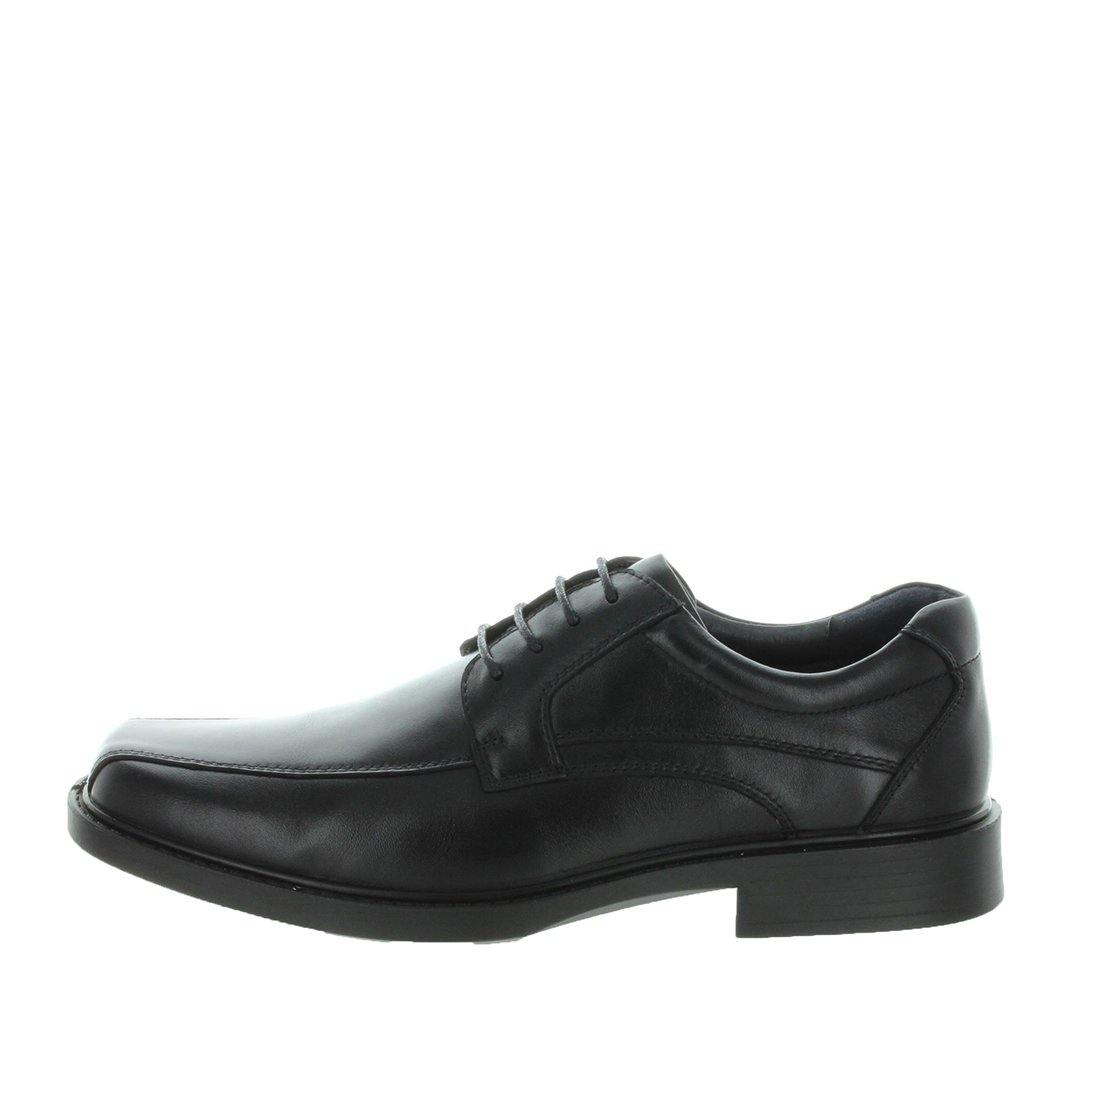 TIMOTHY by CHURCHILL - iShoes - Men's Shoes, Men's Shoes: Dress, School Shoes, School Shoes: Senior, School Shoes: Senior Boy's - FOOTWEAR-FOOTWEAR